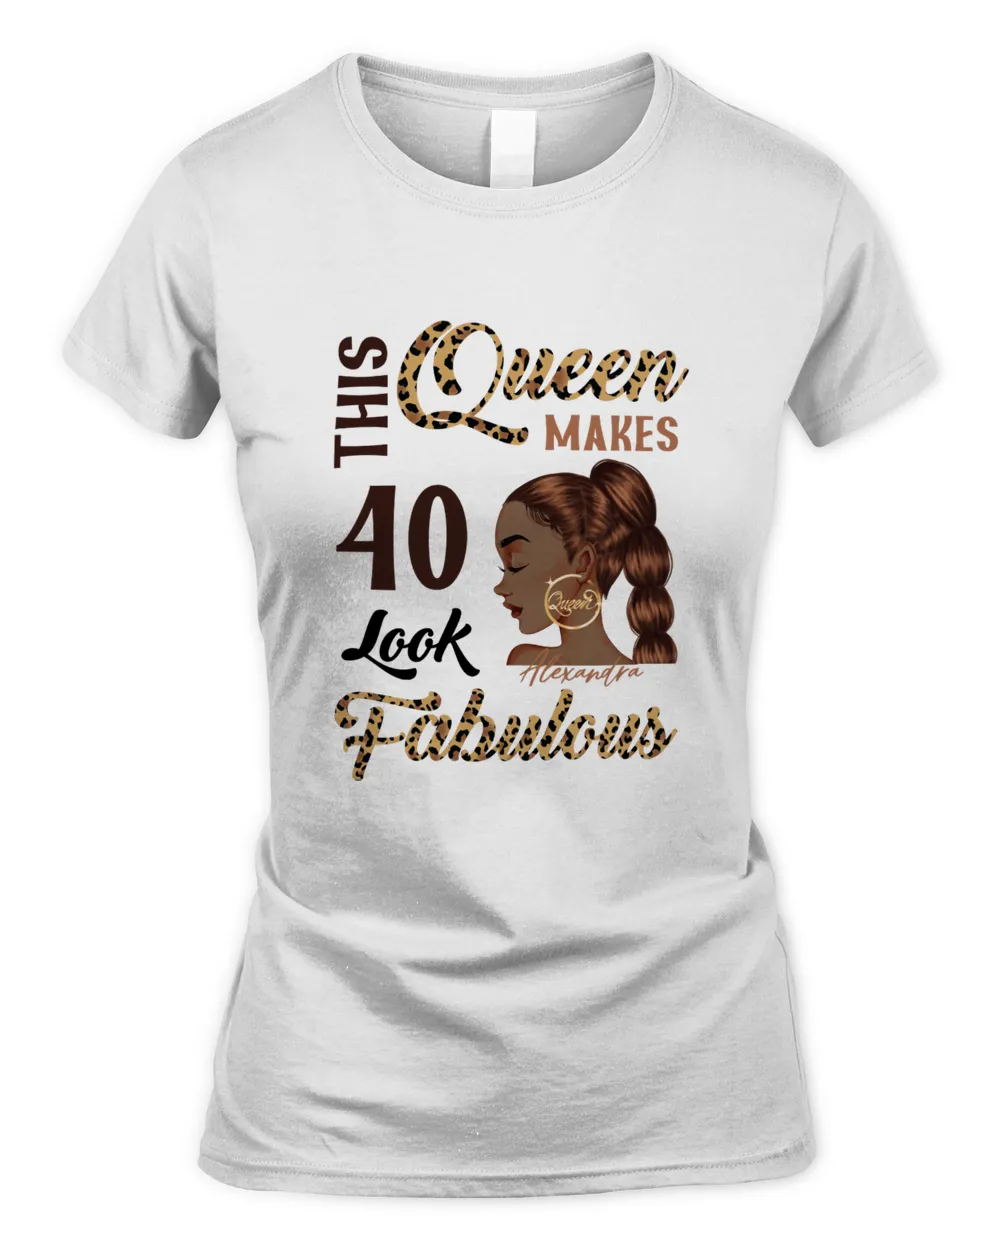 DH Personalized This Queen Look Like Fabulous Shirt, Birthday Gift For Black Girl, Woman Birthday Shirt